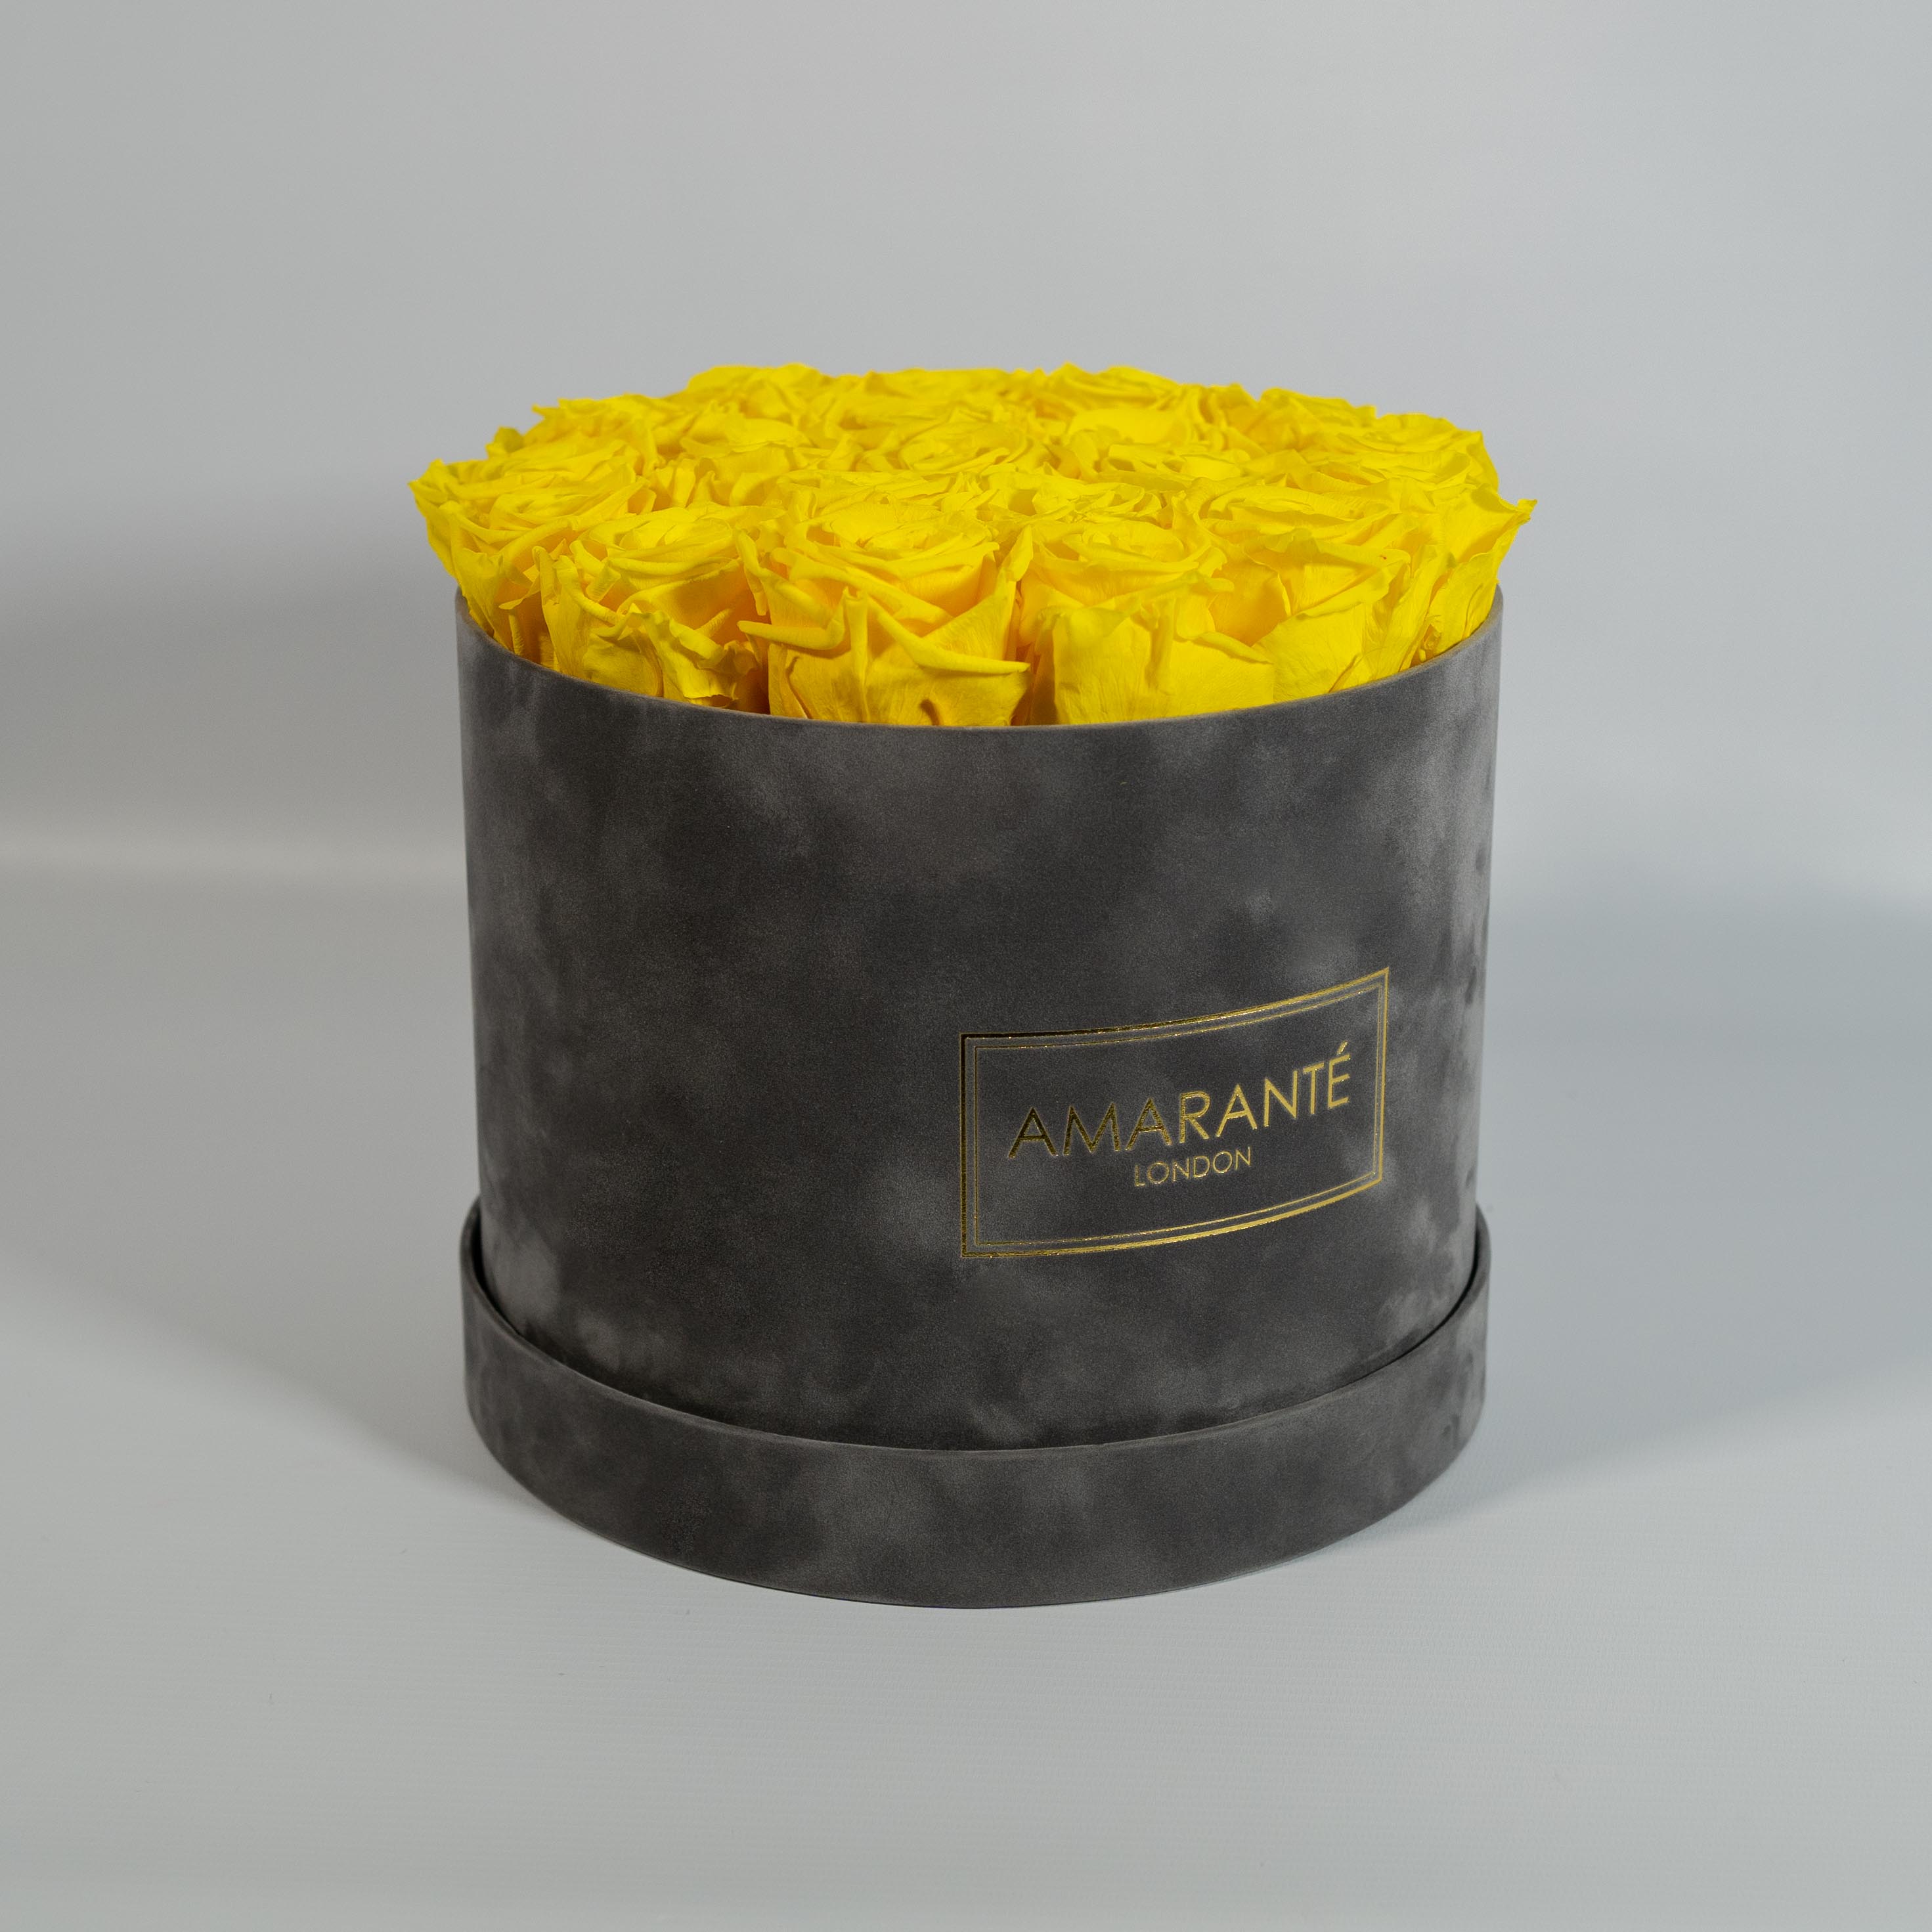 Aromatic yellow Roses featured in a creative grey large box